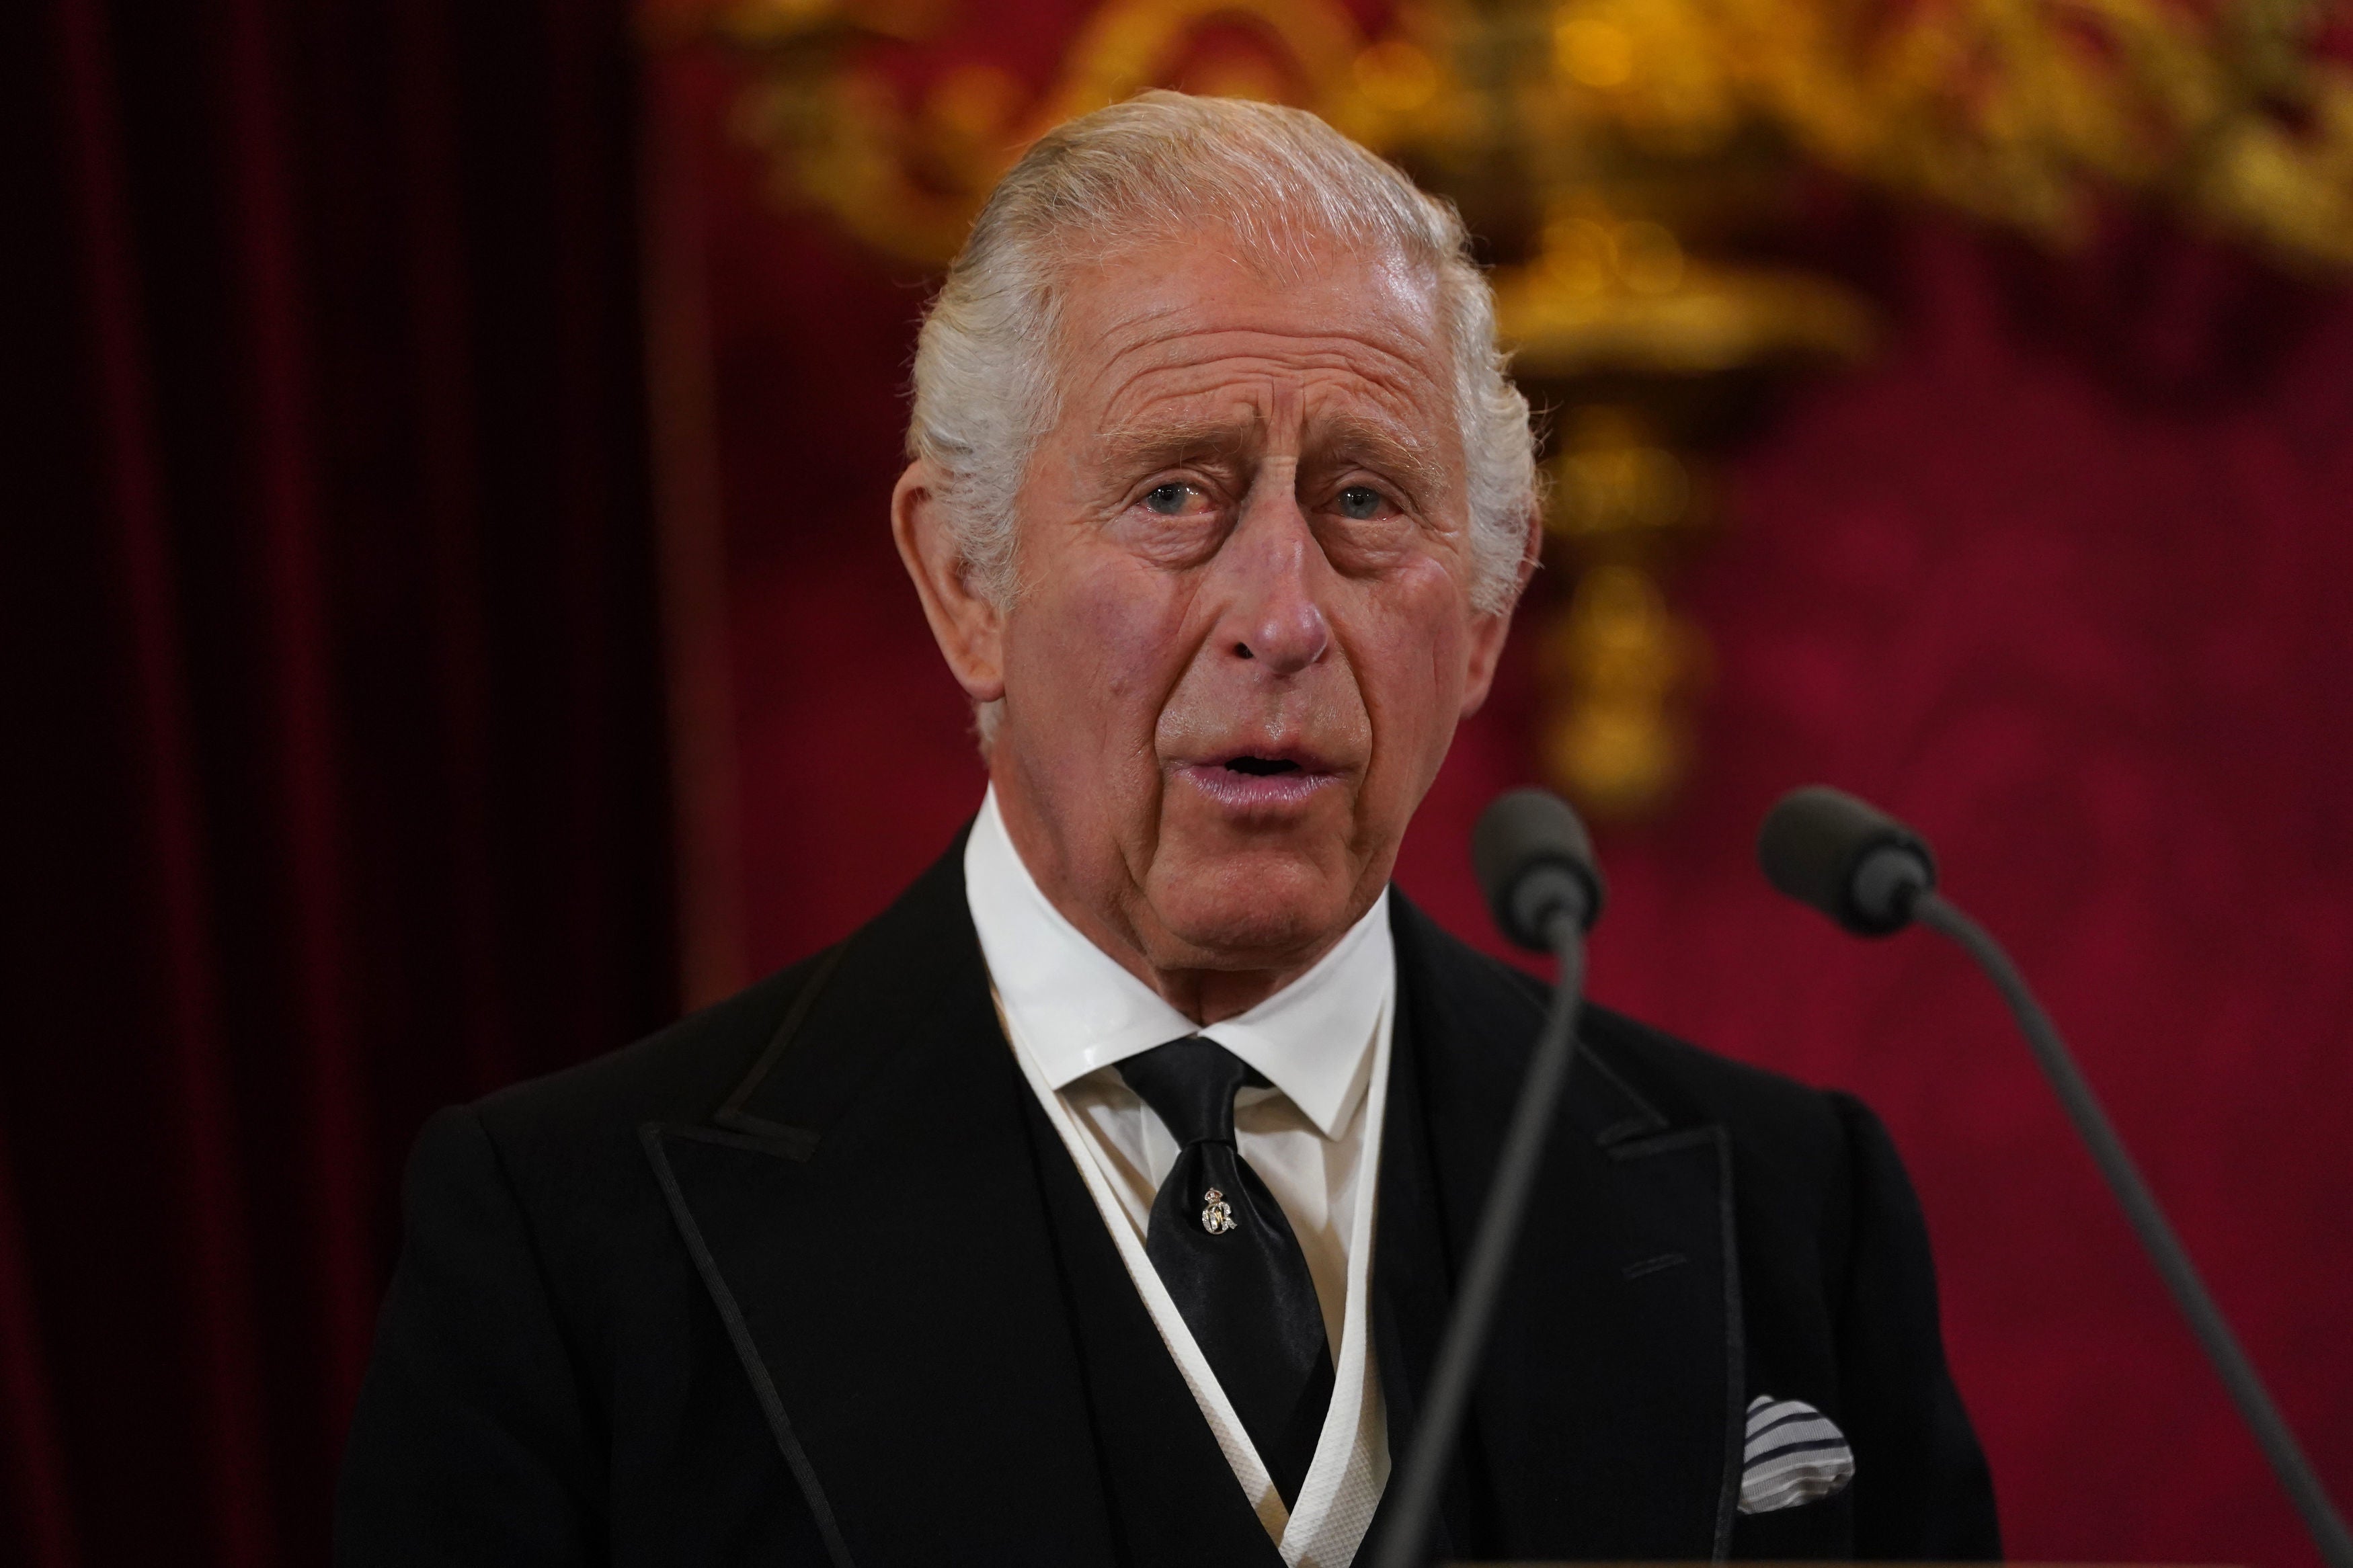 Charles, now King, will be joined by his siblings at the service